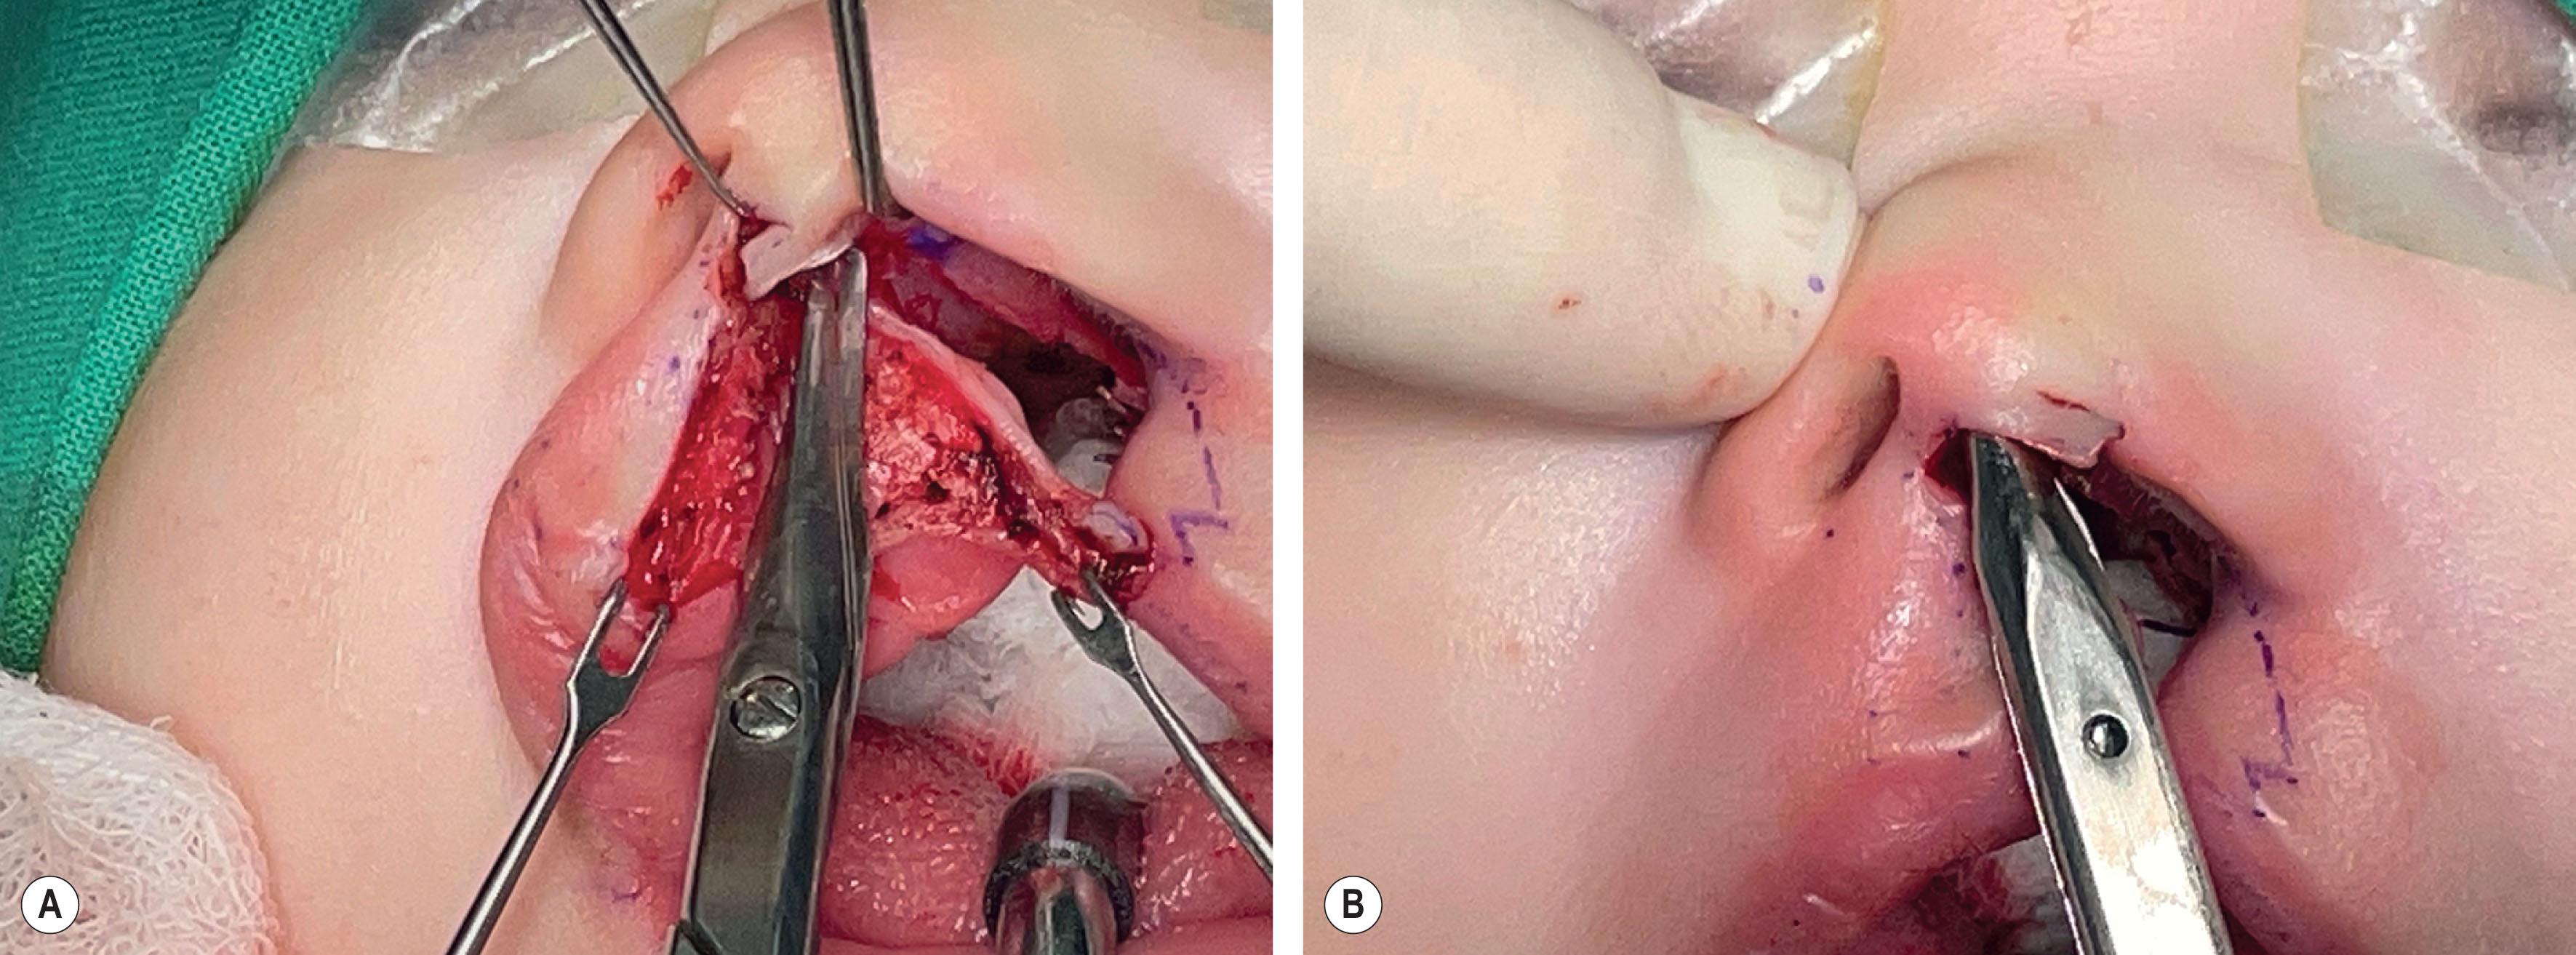 Figure 19.2.18, (A) The C-flap is extended from the point CPHIL along the skin and mucosa junction to the deepest point of the skin overlying the premaxilla. At the premaxilla, the incision turns superiorly along the junction of columellar skin and septal mucosa. Use a tenotomy scissors to separate the C-flap from the underlying premaxilla and septum. (B) Separating the inter-crural space will allow upward repositioning of the displaced foot plate of the medial crura on the cleft side.